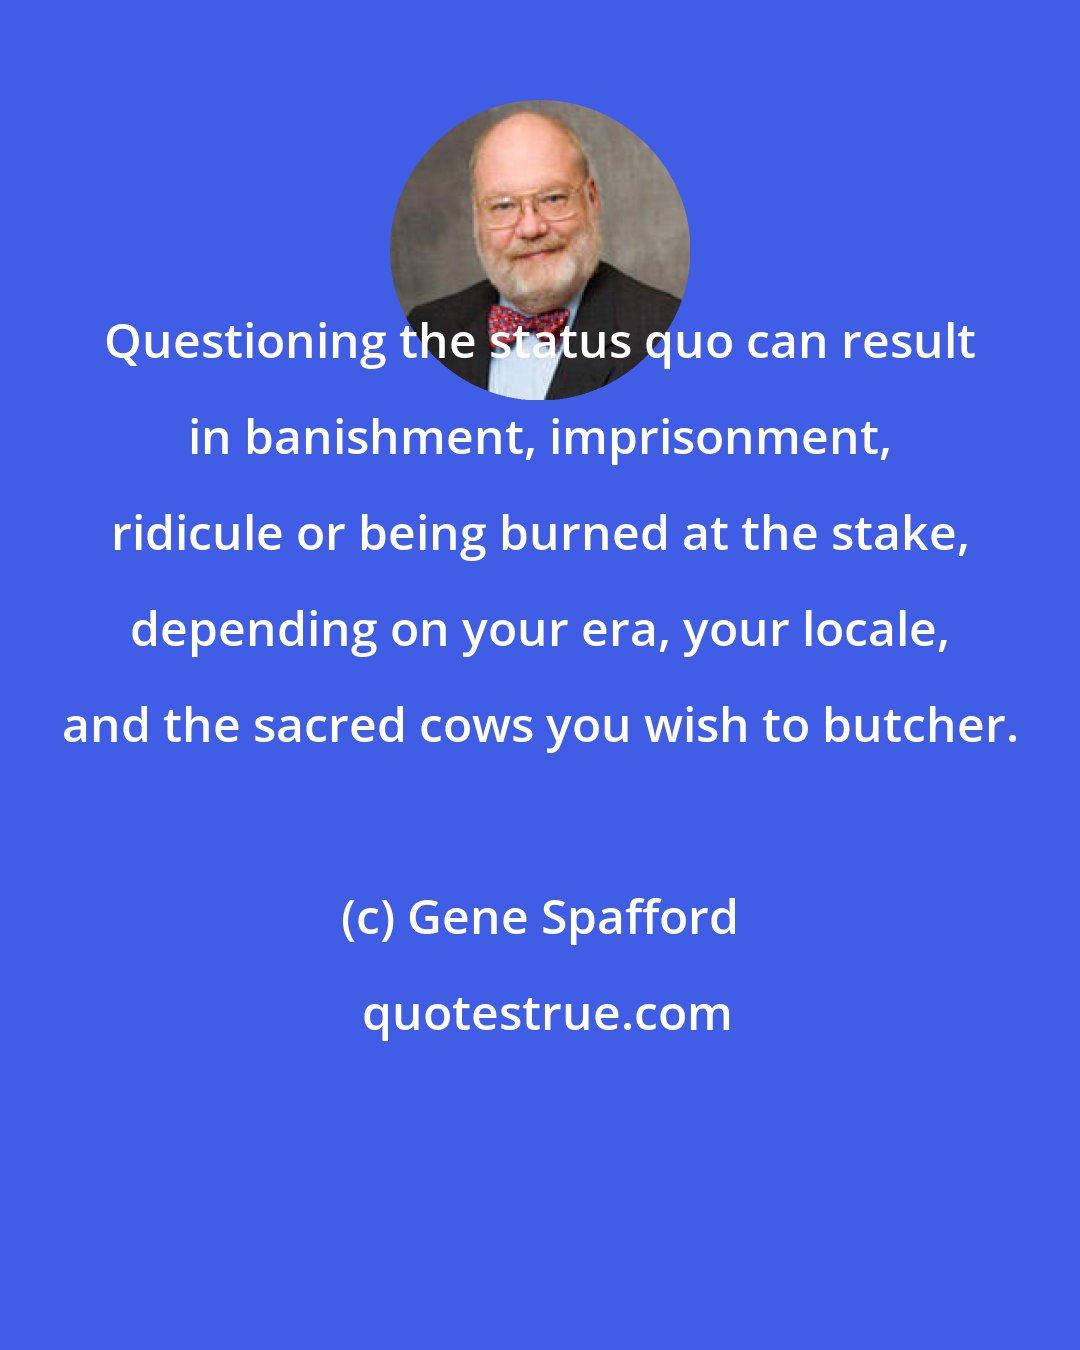 Gene Spafford: Questioning the status quo can result in banishment, imprisonment, ridicule or being burned at the stake, depending on your era, your locale, and the sacred cows you wish to butcher.